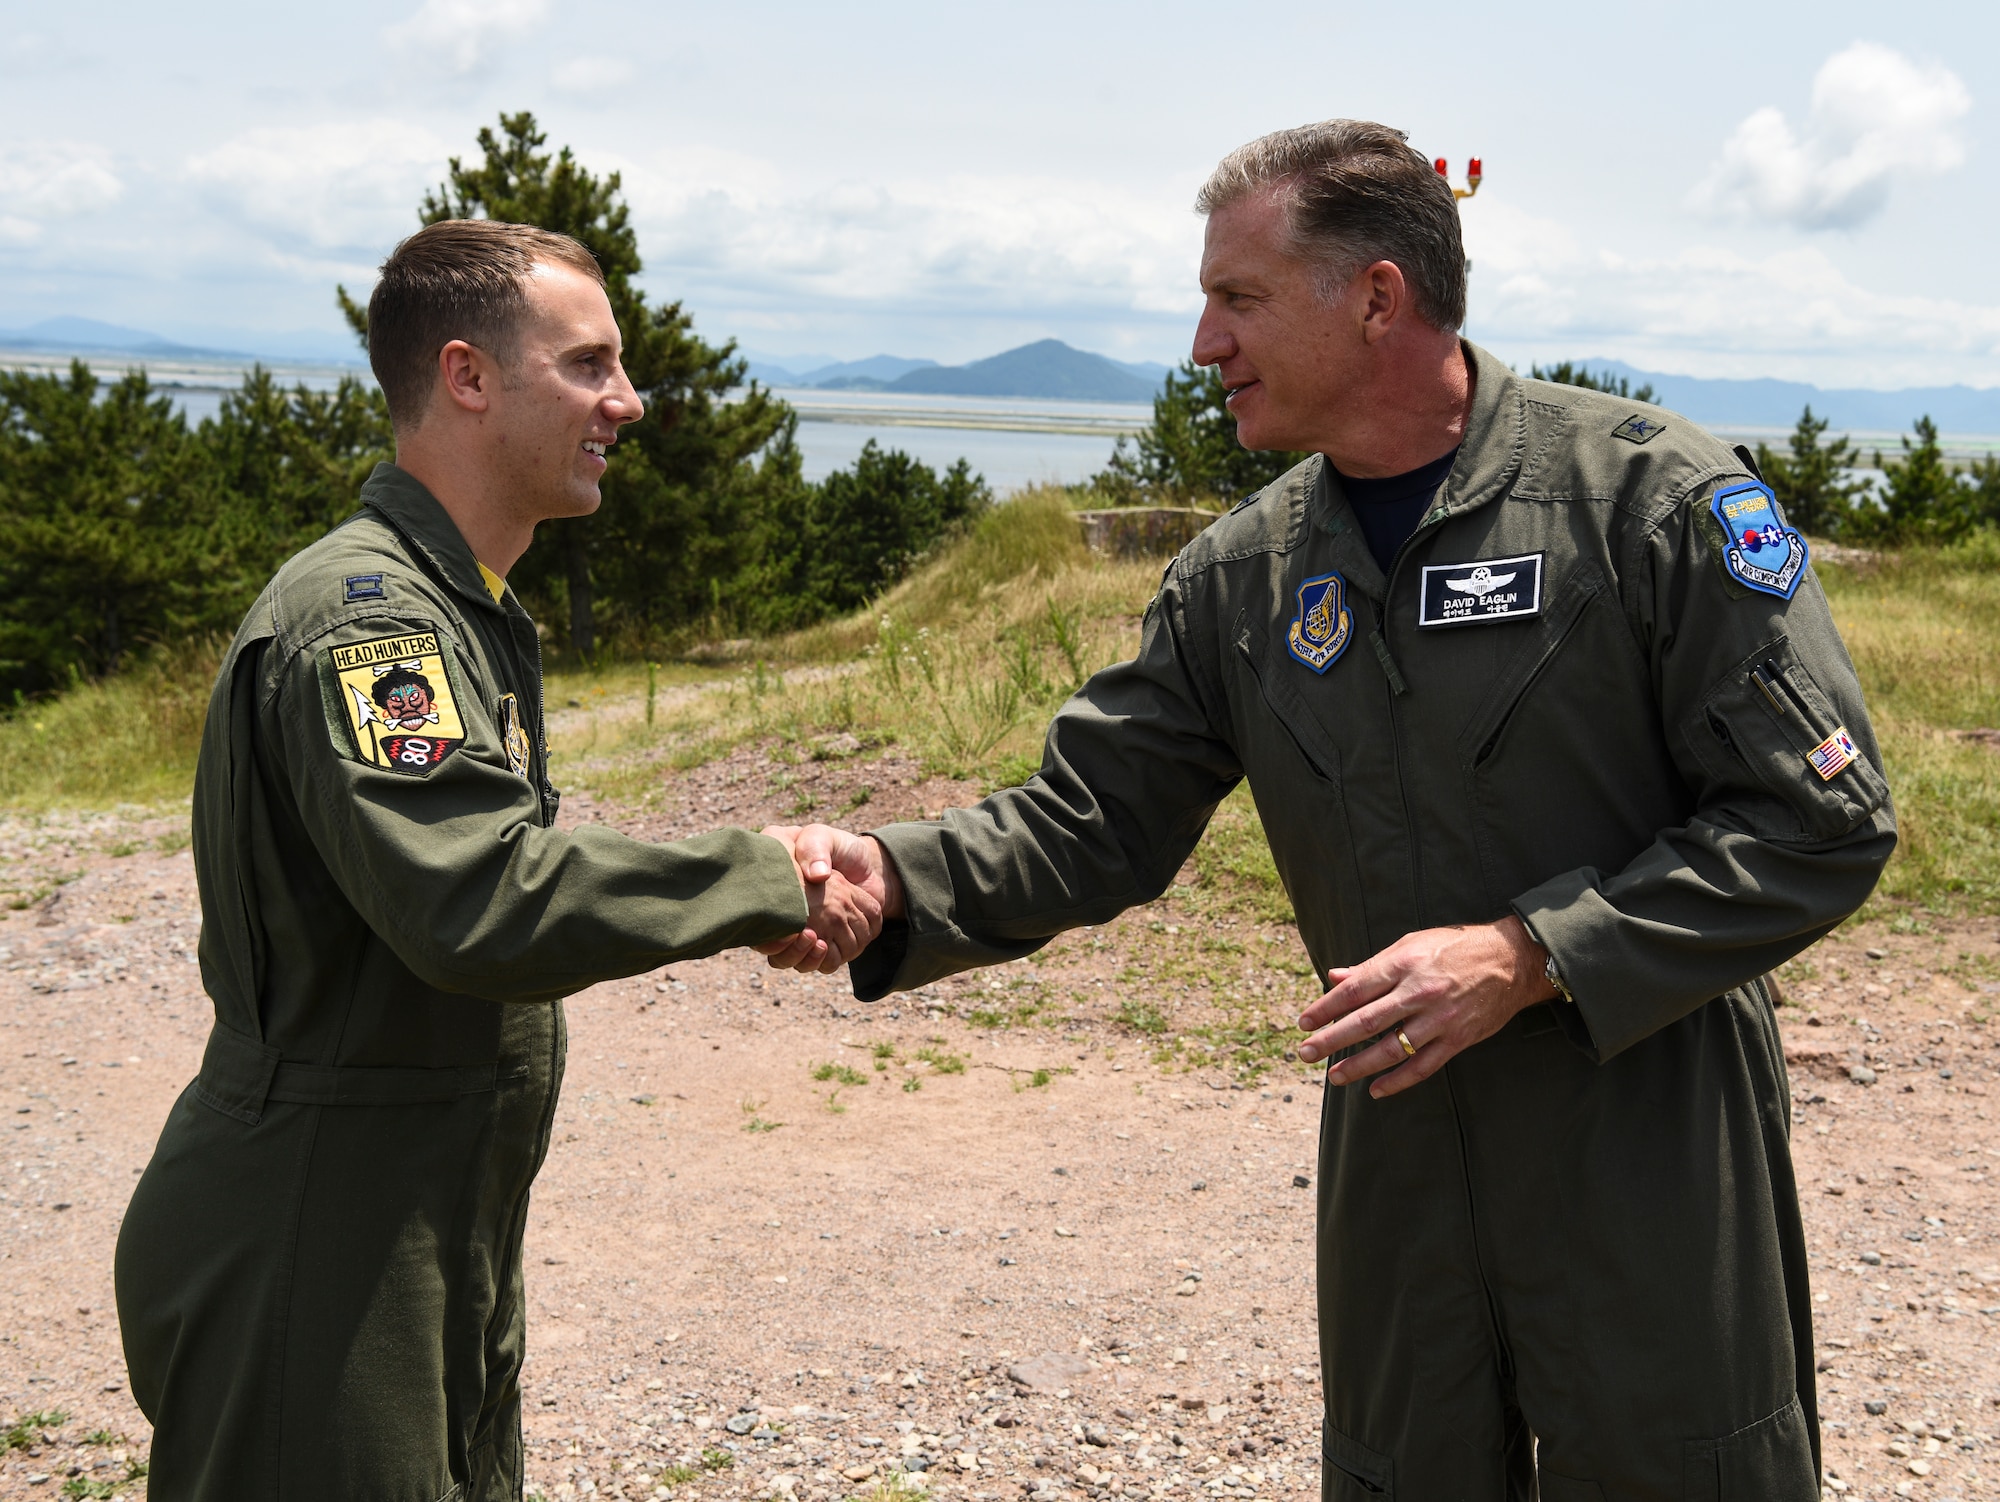 U.S. Air Force Brig. Gen. David Eaglin (right), 7th Air Force vice commander, coins Capt. Andrew Marty, 80th Fighter Squadron pilot, during an immersion tour at Kunsan Air Base, Republic of Korea, July 12, 2019. Eaglin introduced himself and recognized some of the Airmen from the Wolf Pack for their professionalism and readiness. (U.S. Air Force photo by Staff Sgt. Joshua Edwards)